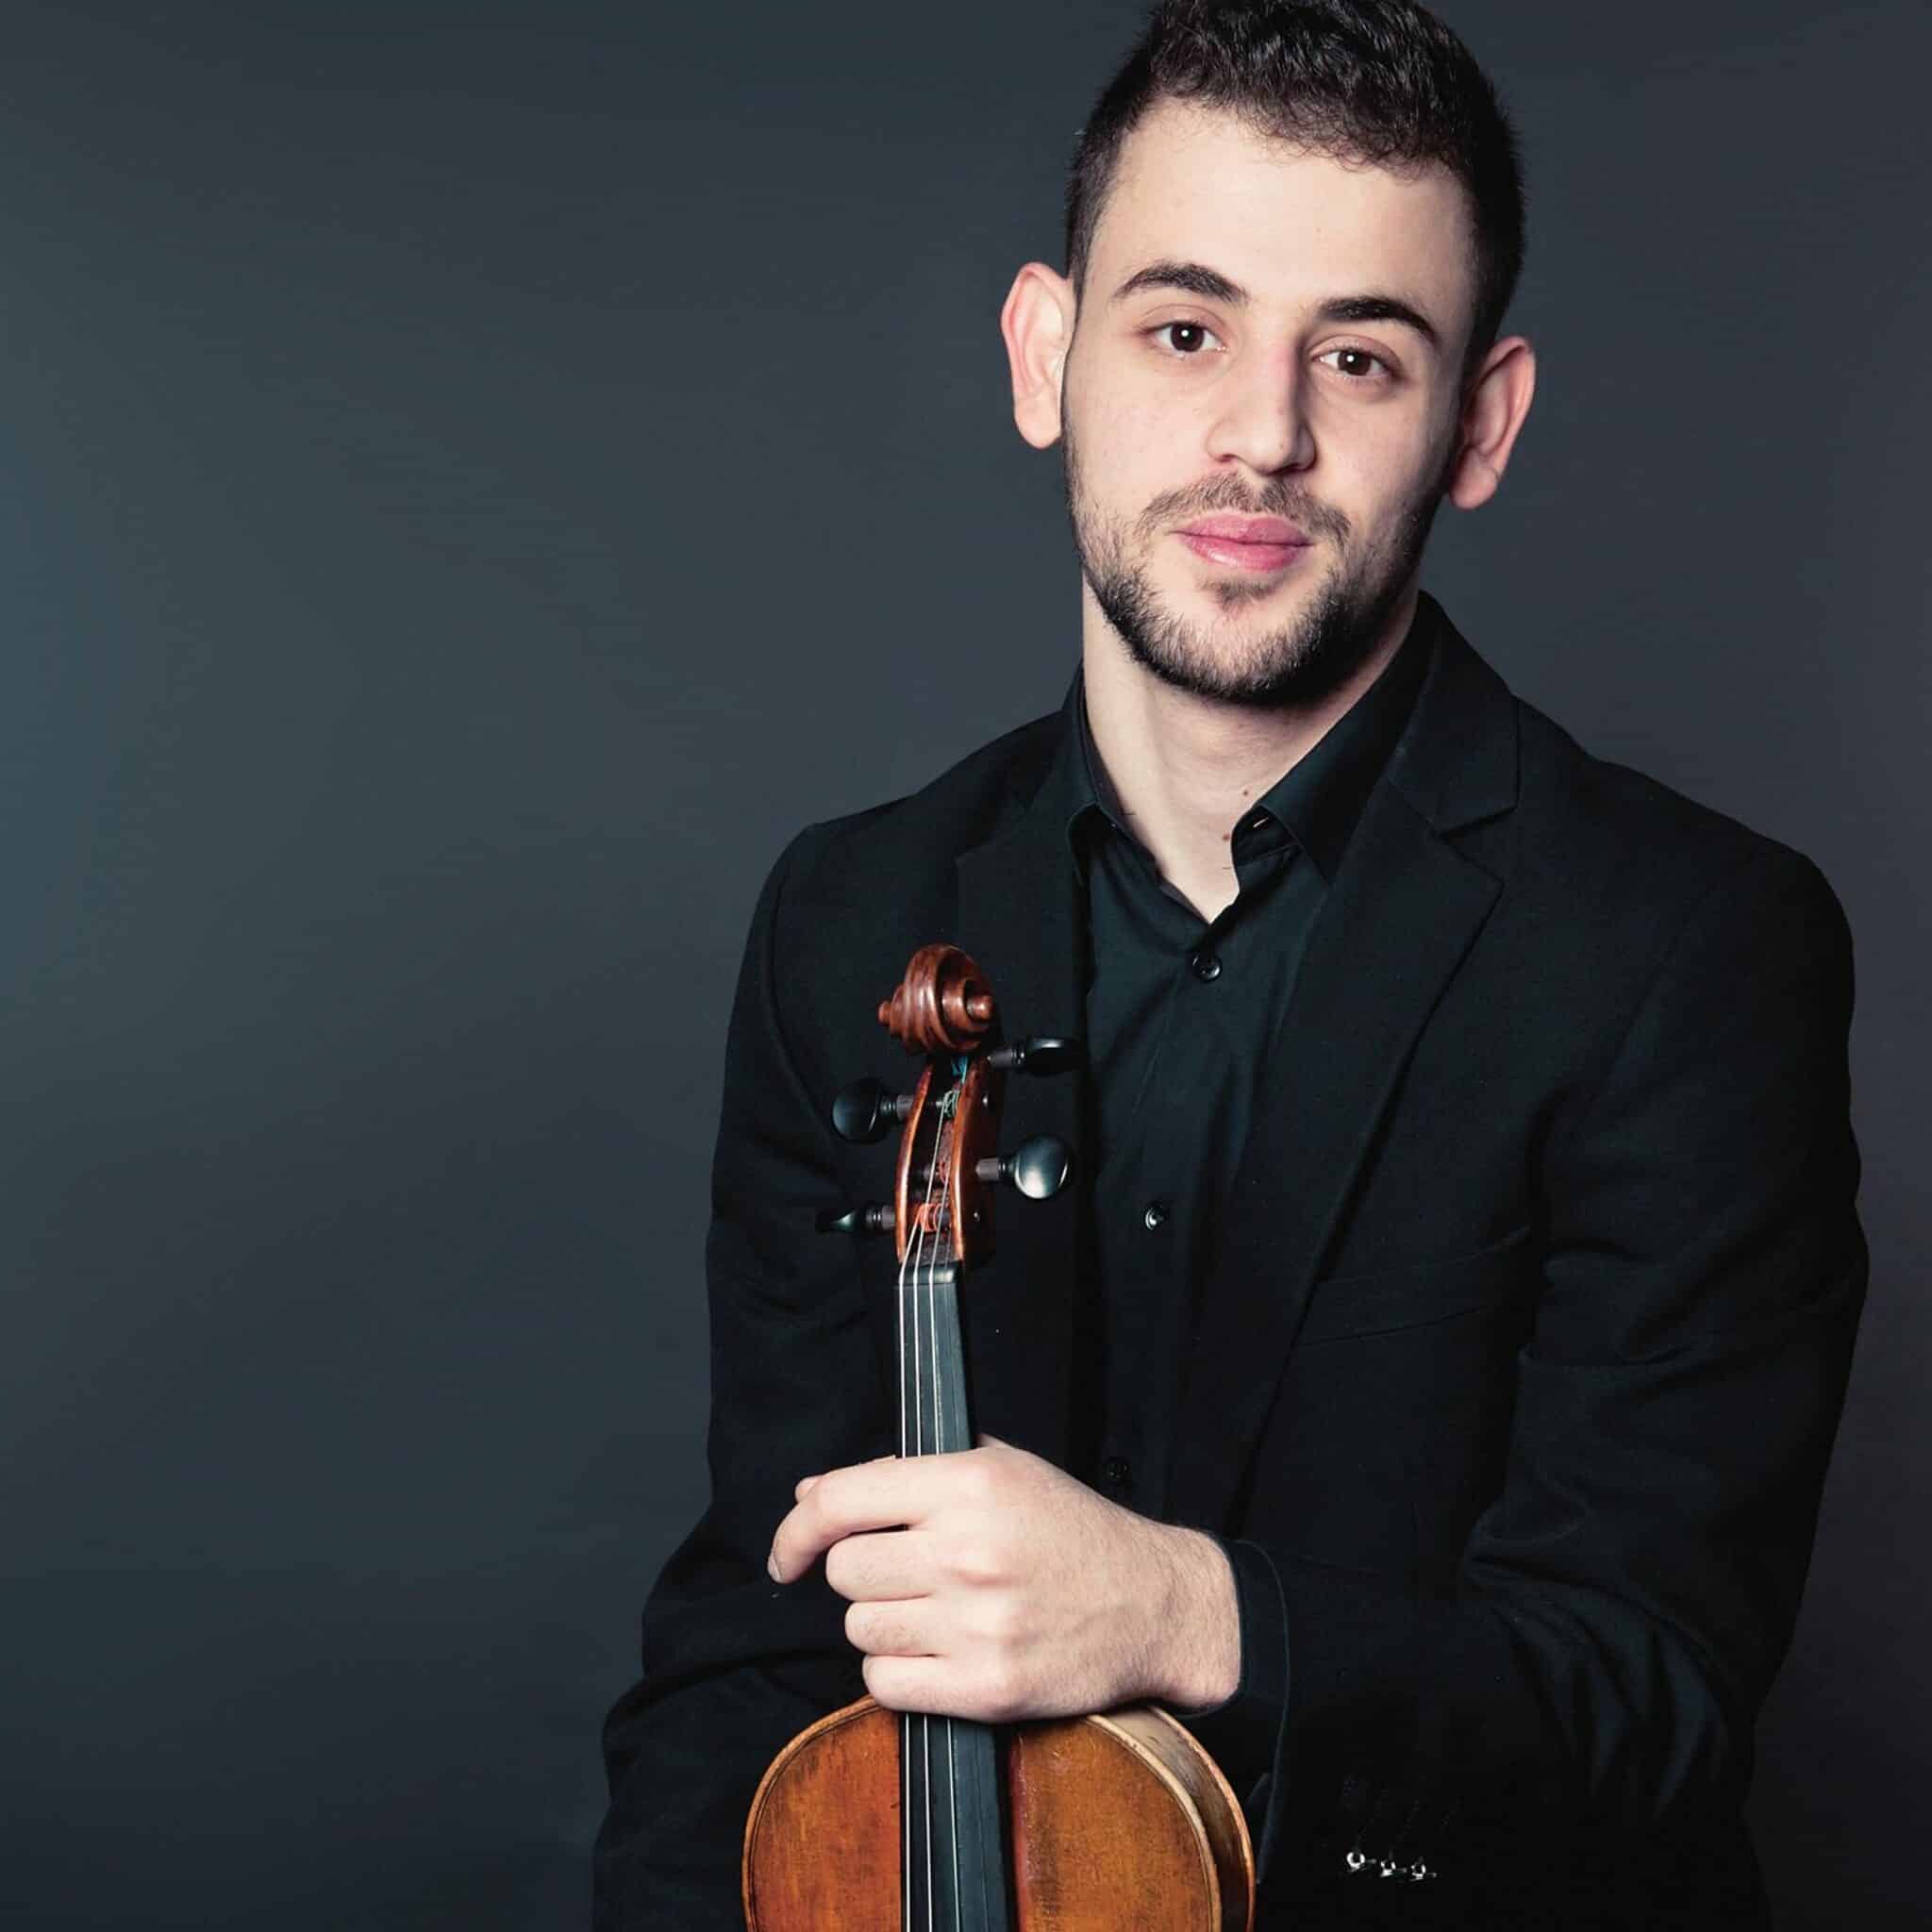 Concertmaster plays for peace at Vienna Opera